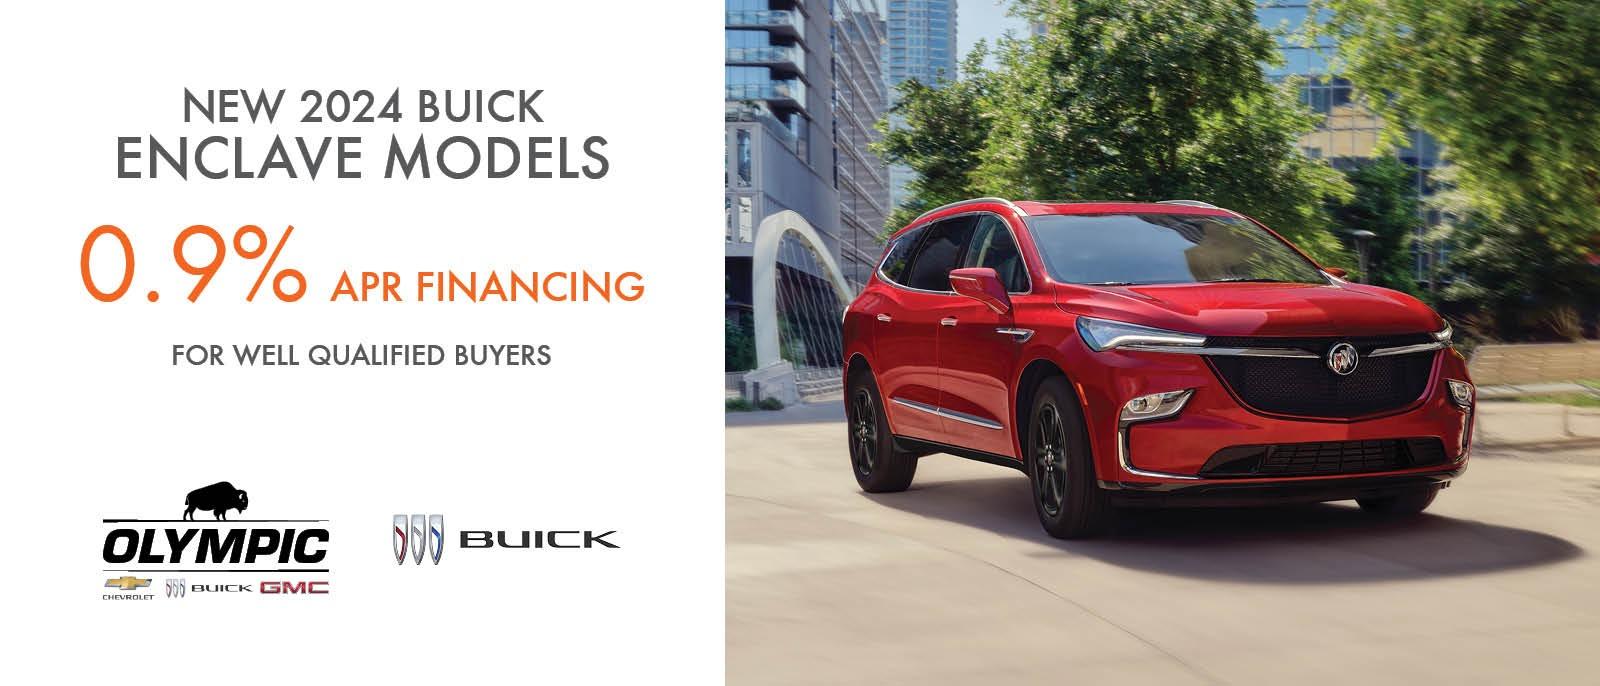 NEW 2024 BUICK
ENCLAVE MODELS